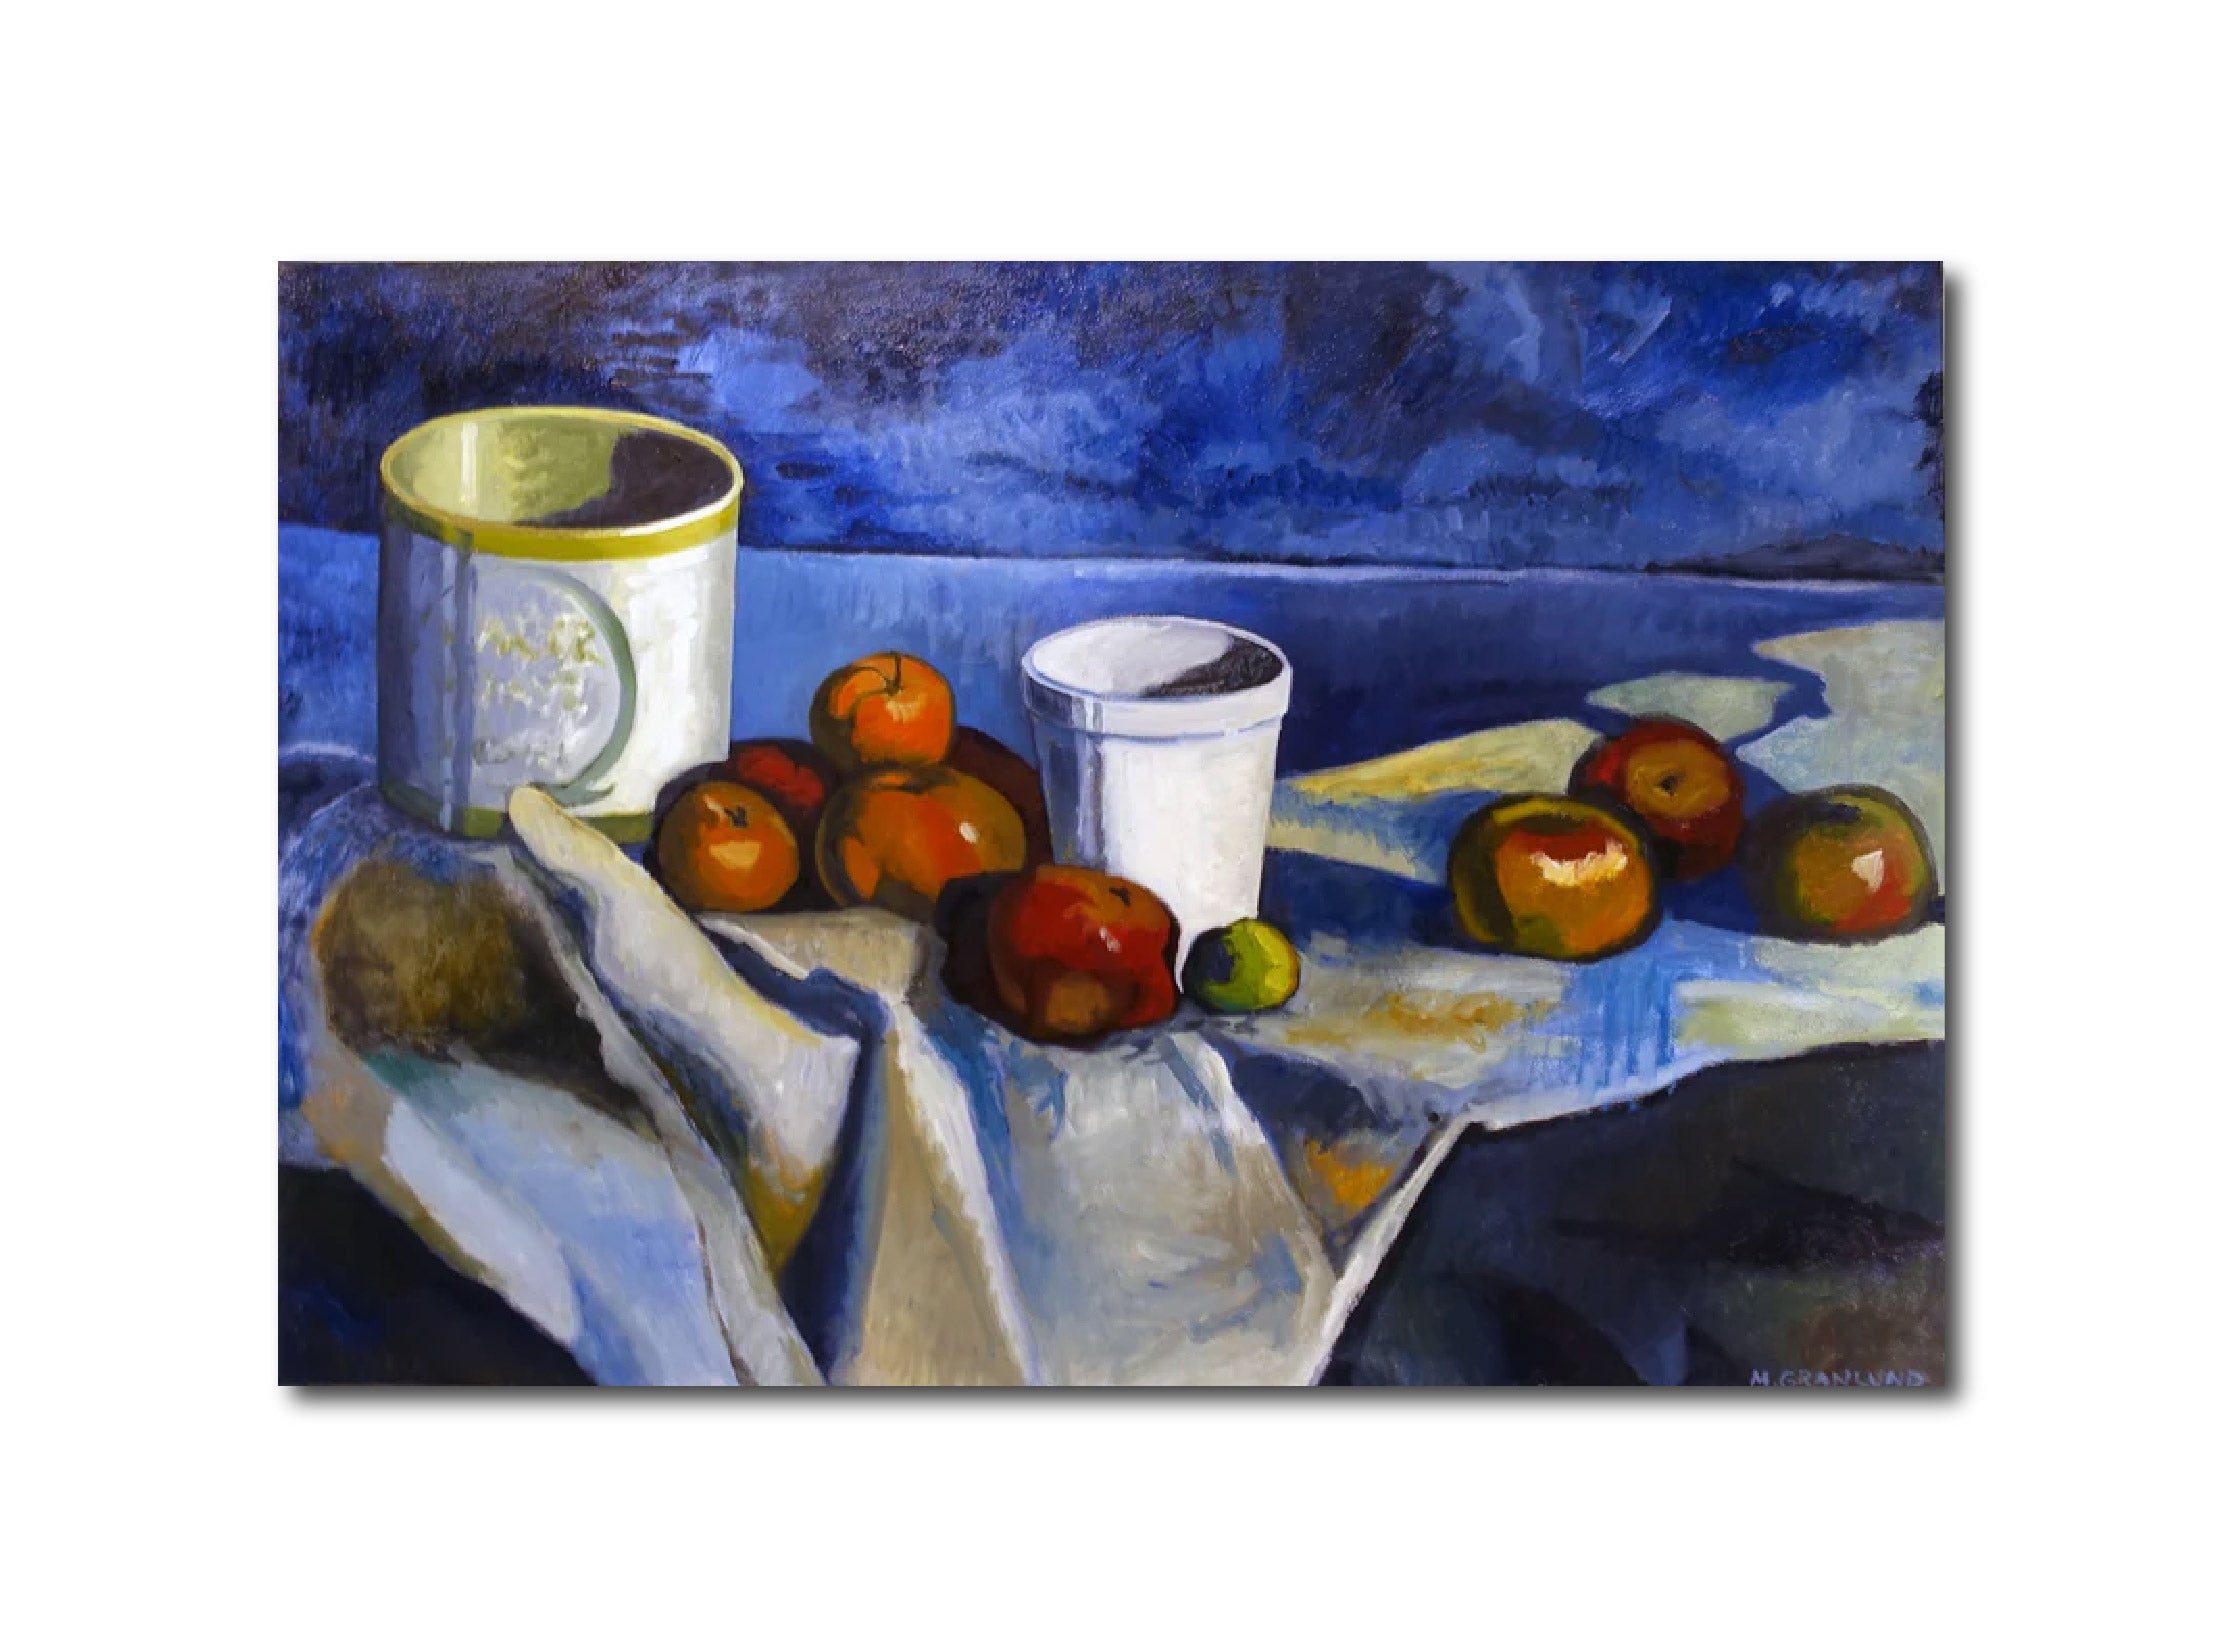 'STILL LIFE WITH ARCTIC APPLES, STYROFOAM CUP AND OIL CAN' - Oil Paint on Canvas